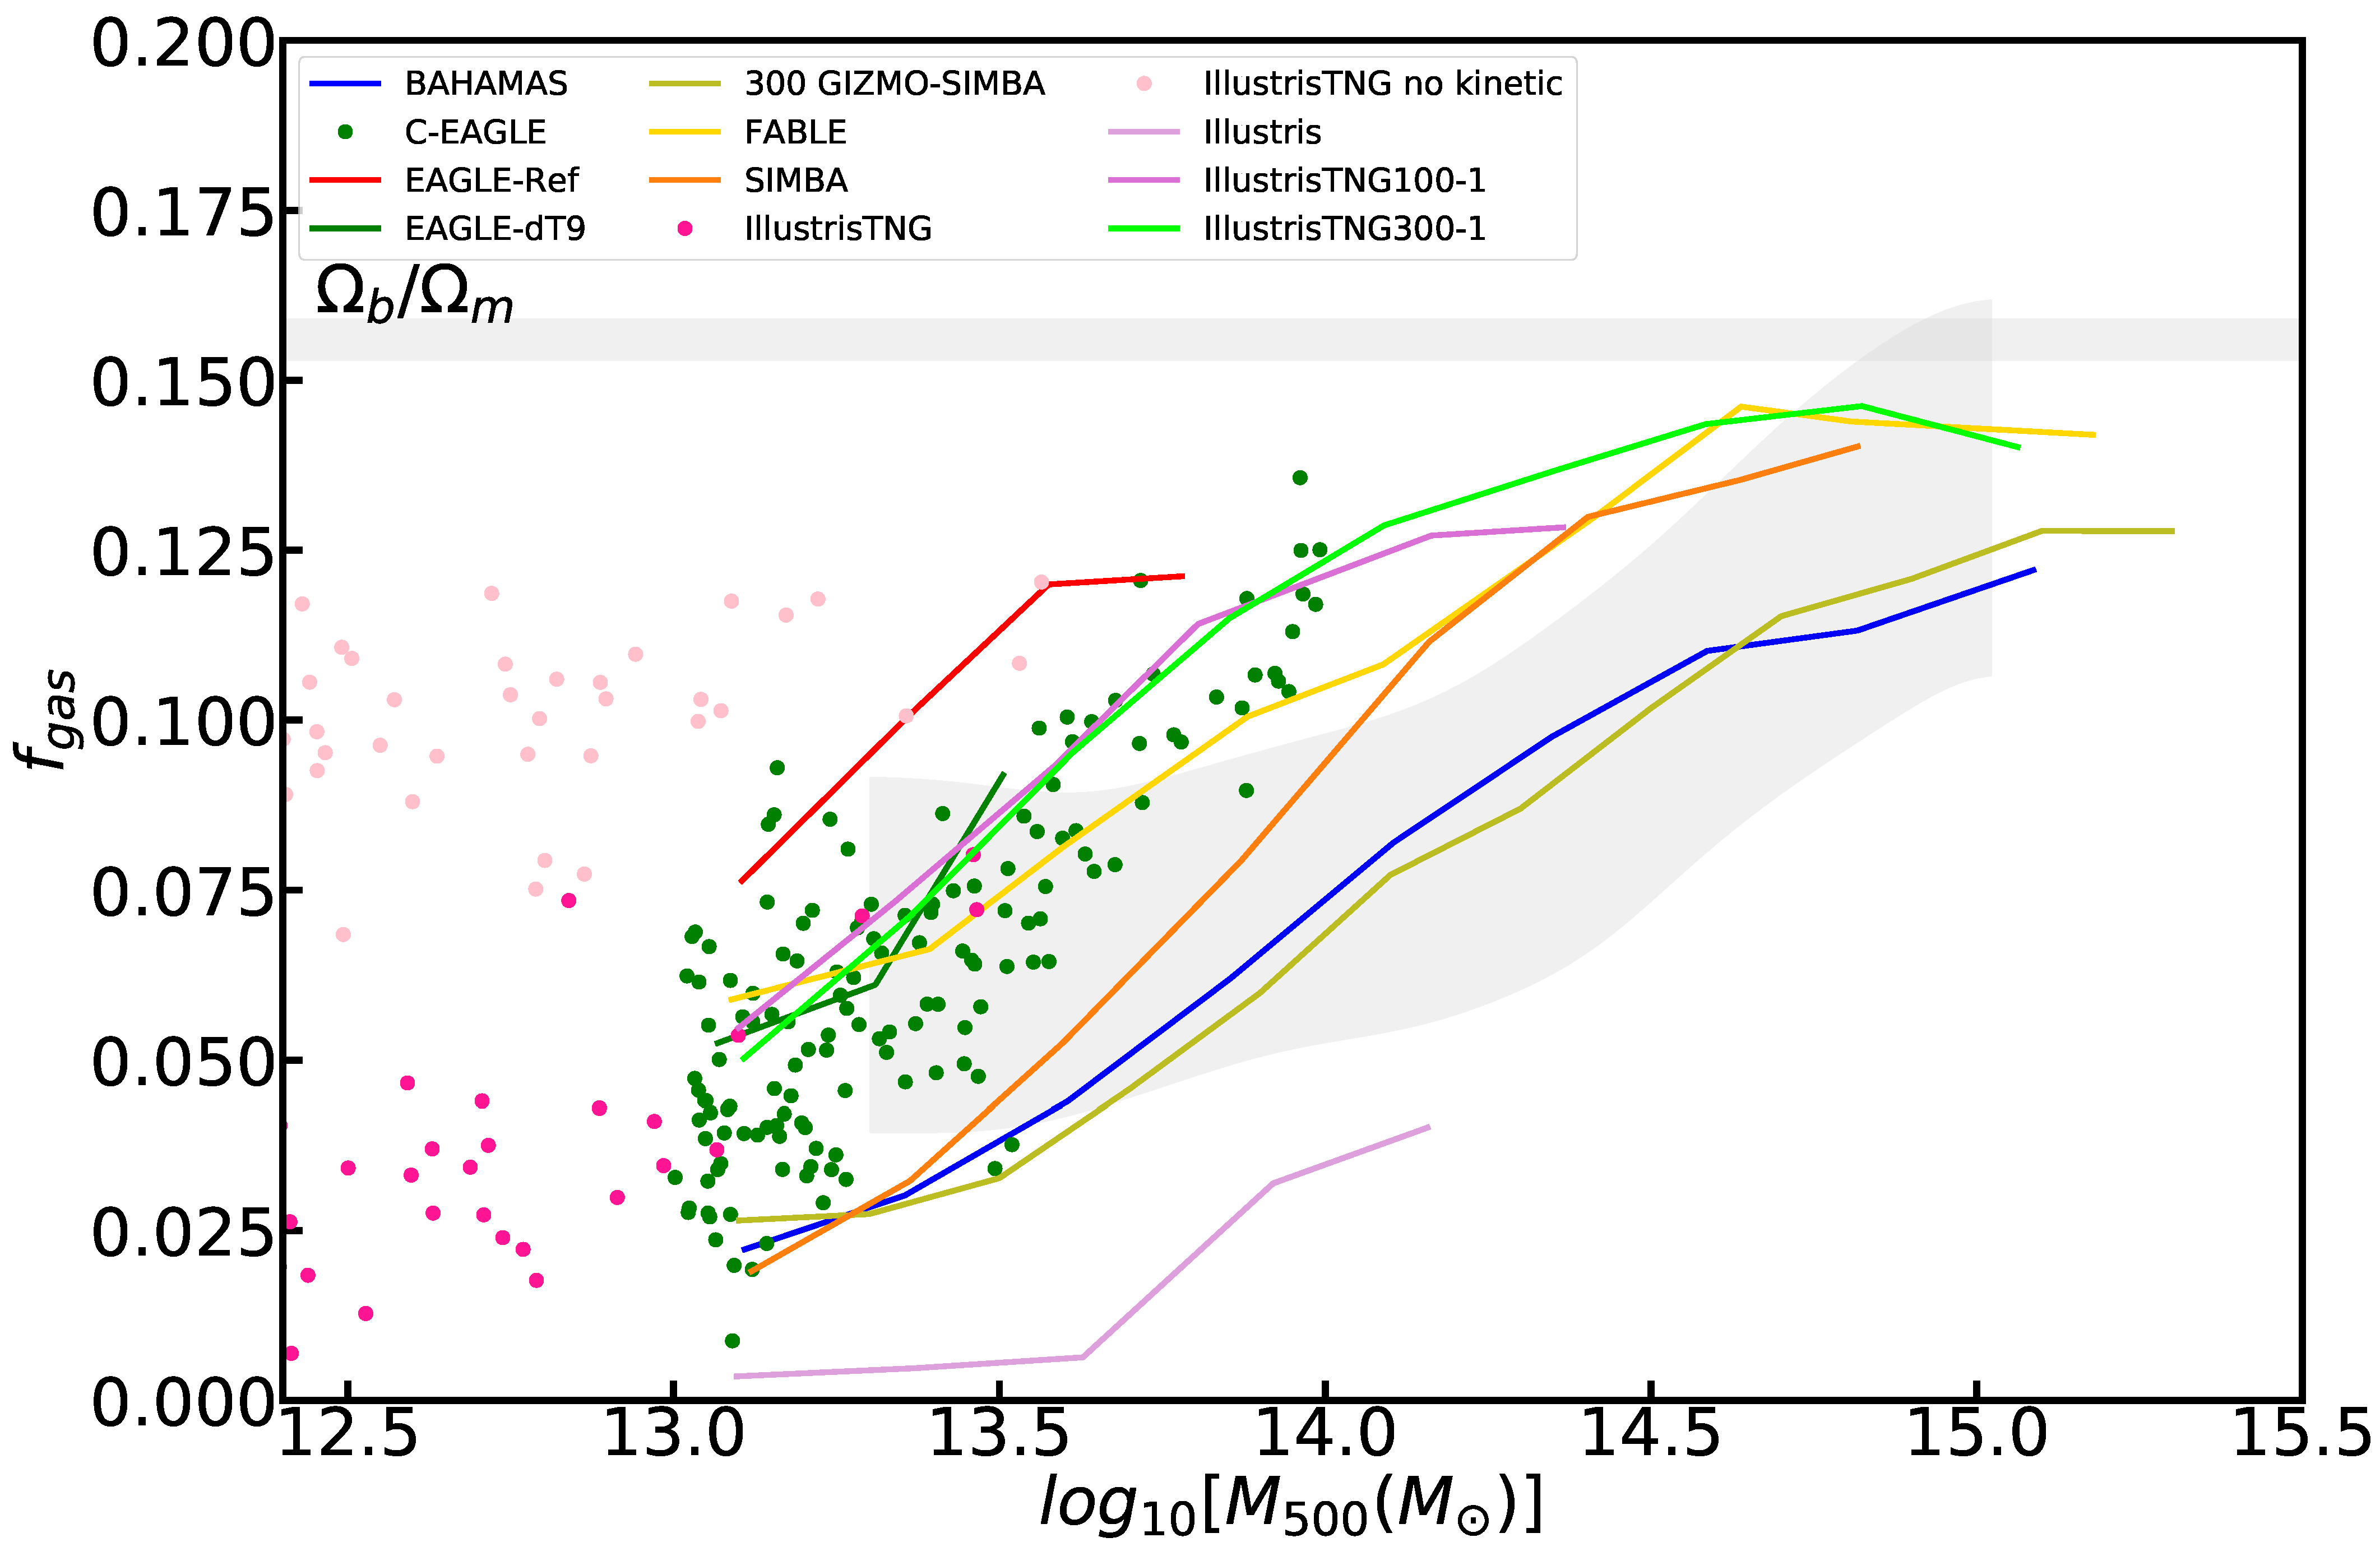 Universe | Free Full-Text | Feedback from Active Galactic Nuclei in Galaxy  Groups | HTML